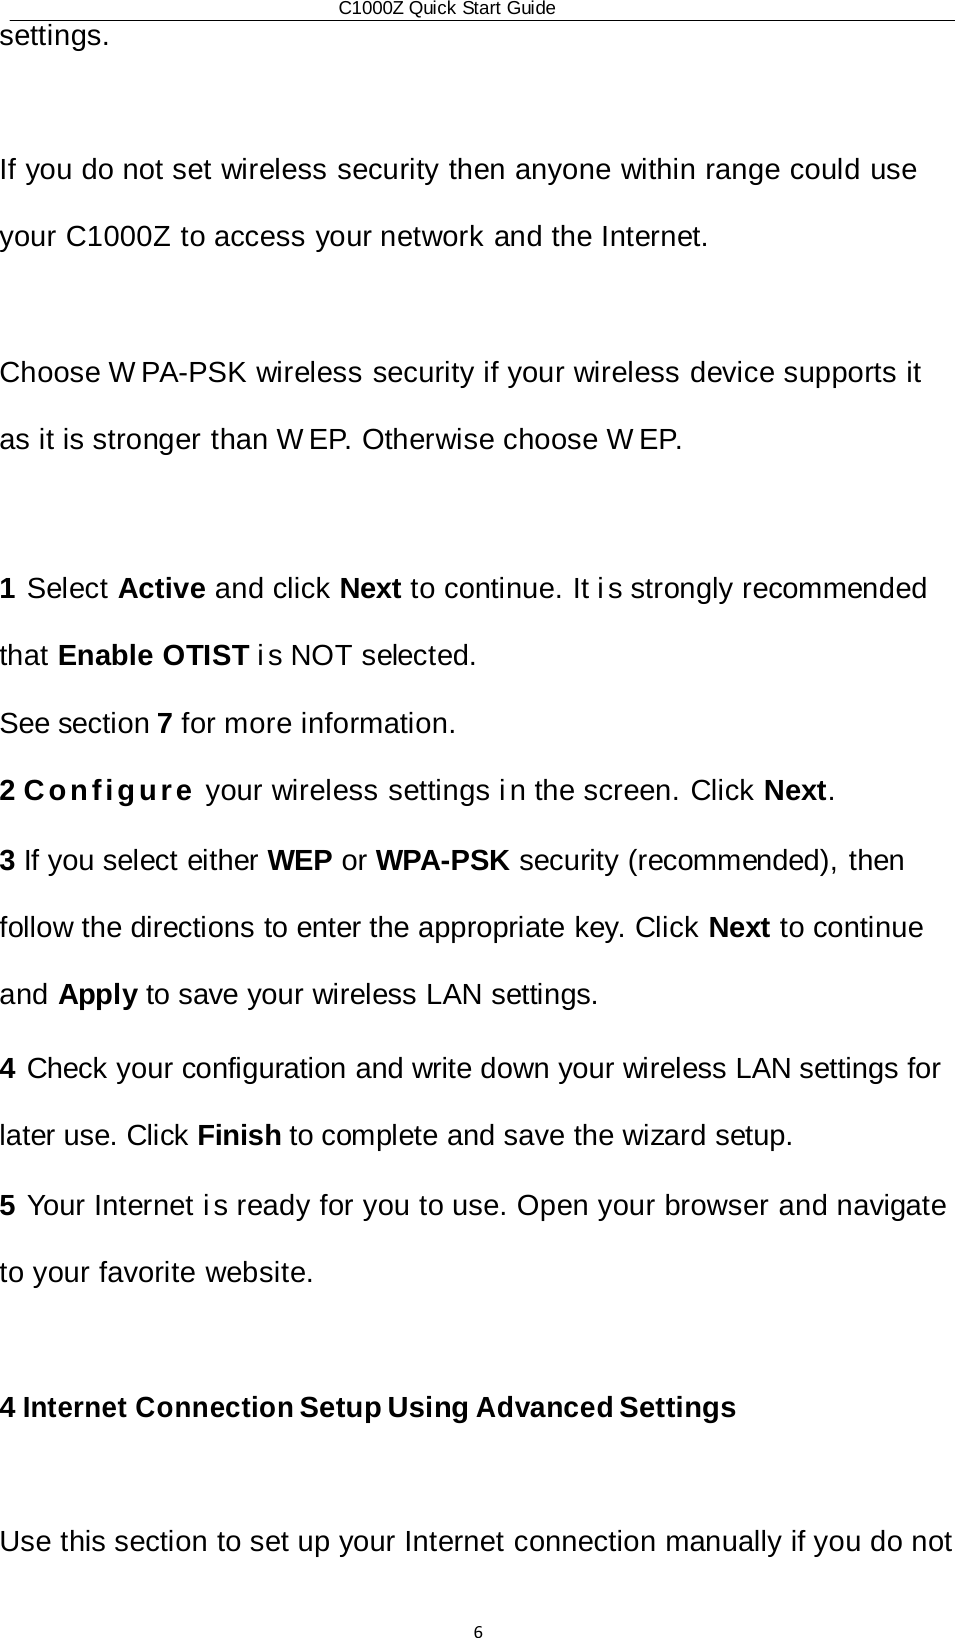 C1000Z Quick Start Guide6settings.  If you do not set wireless security then anyone within range could use your C1000Z to access your network and the Internet.  Choose W PA-PSK wireless security if your wireless device supports it as it is stronger than W EP. Otherwise choose W EP.  1 Select Active and click Next to continue. It i s strongly recommended that Enable OTIST i s  NOT  selected. See section 7 for more information. 2 Configure your wireless settings i n the screen. Click Next. 3 If you select either WEP or WPA-PSK security (recommended), then follow the directions to enter the appropriate key. Click Next to continue and Apply to save your wireless LAN settings. 4 Check your configuration and write down your wireless LAN settings for later use. Click Finish to complete and save the wizard setup. 5 Your Internet i s ready for you to use. Open your browser and navigate to your favorite website.  4 Internet Connection Setup Using Advanced Settings  Use this section to set up your Internet connection manually if you do not  